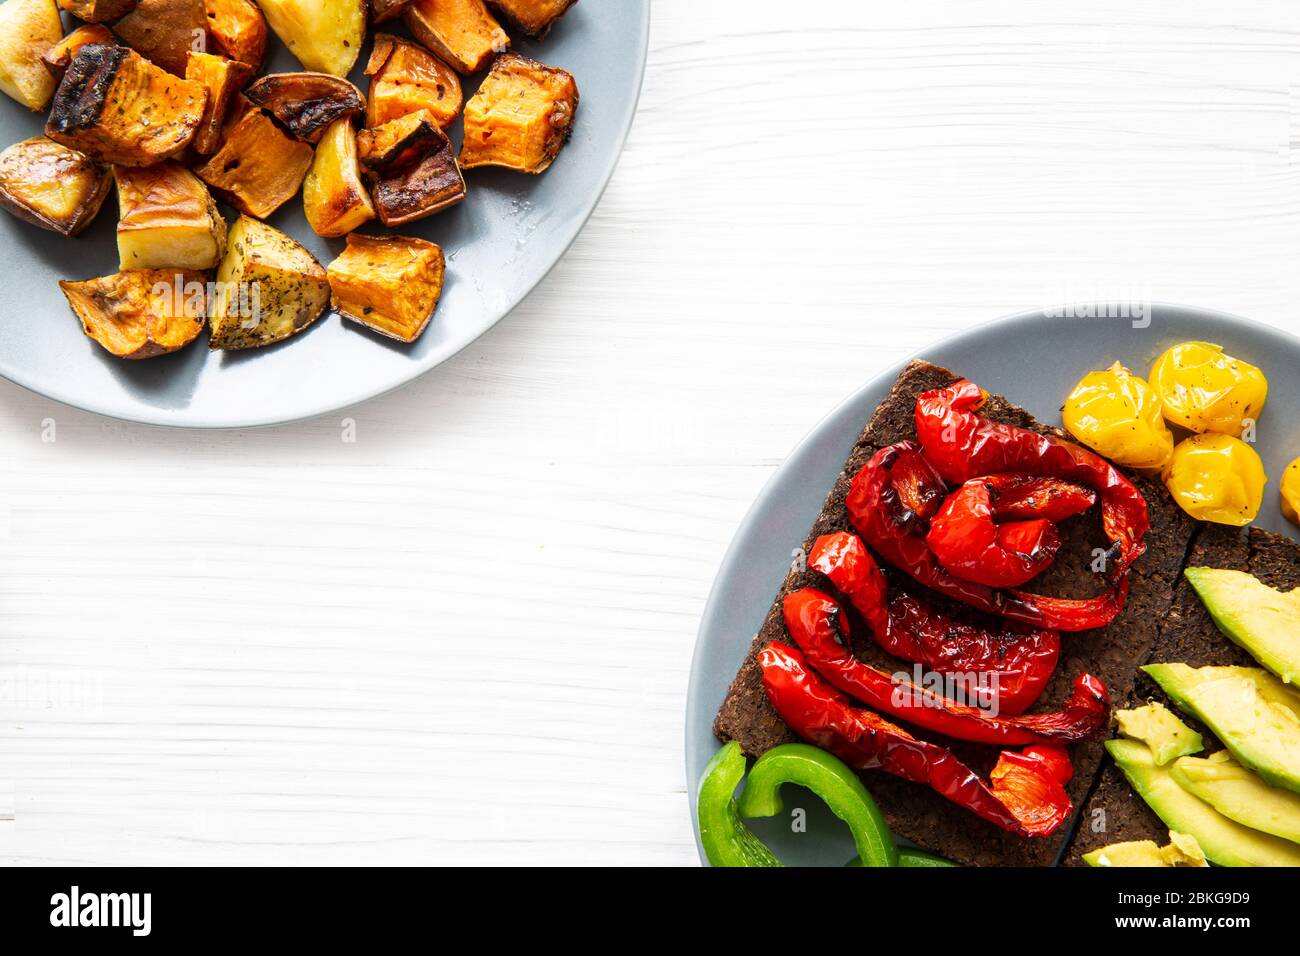 Roasted sweet potatoes (batata) and grilled paprika and avocado healthy toast on white table background, copy space, top view. Stock Photo